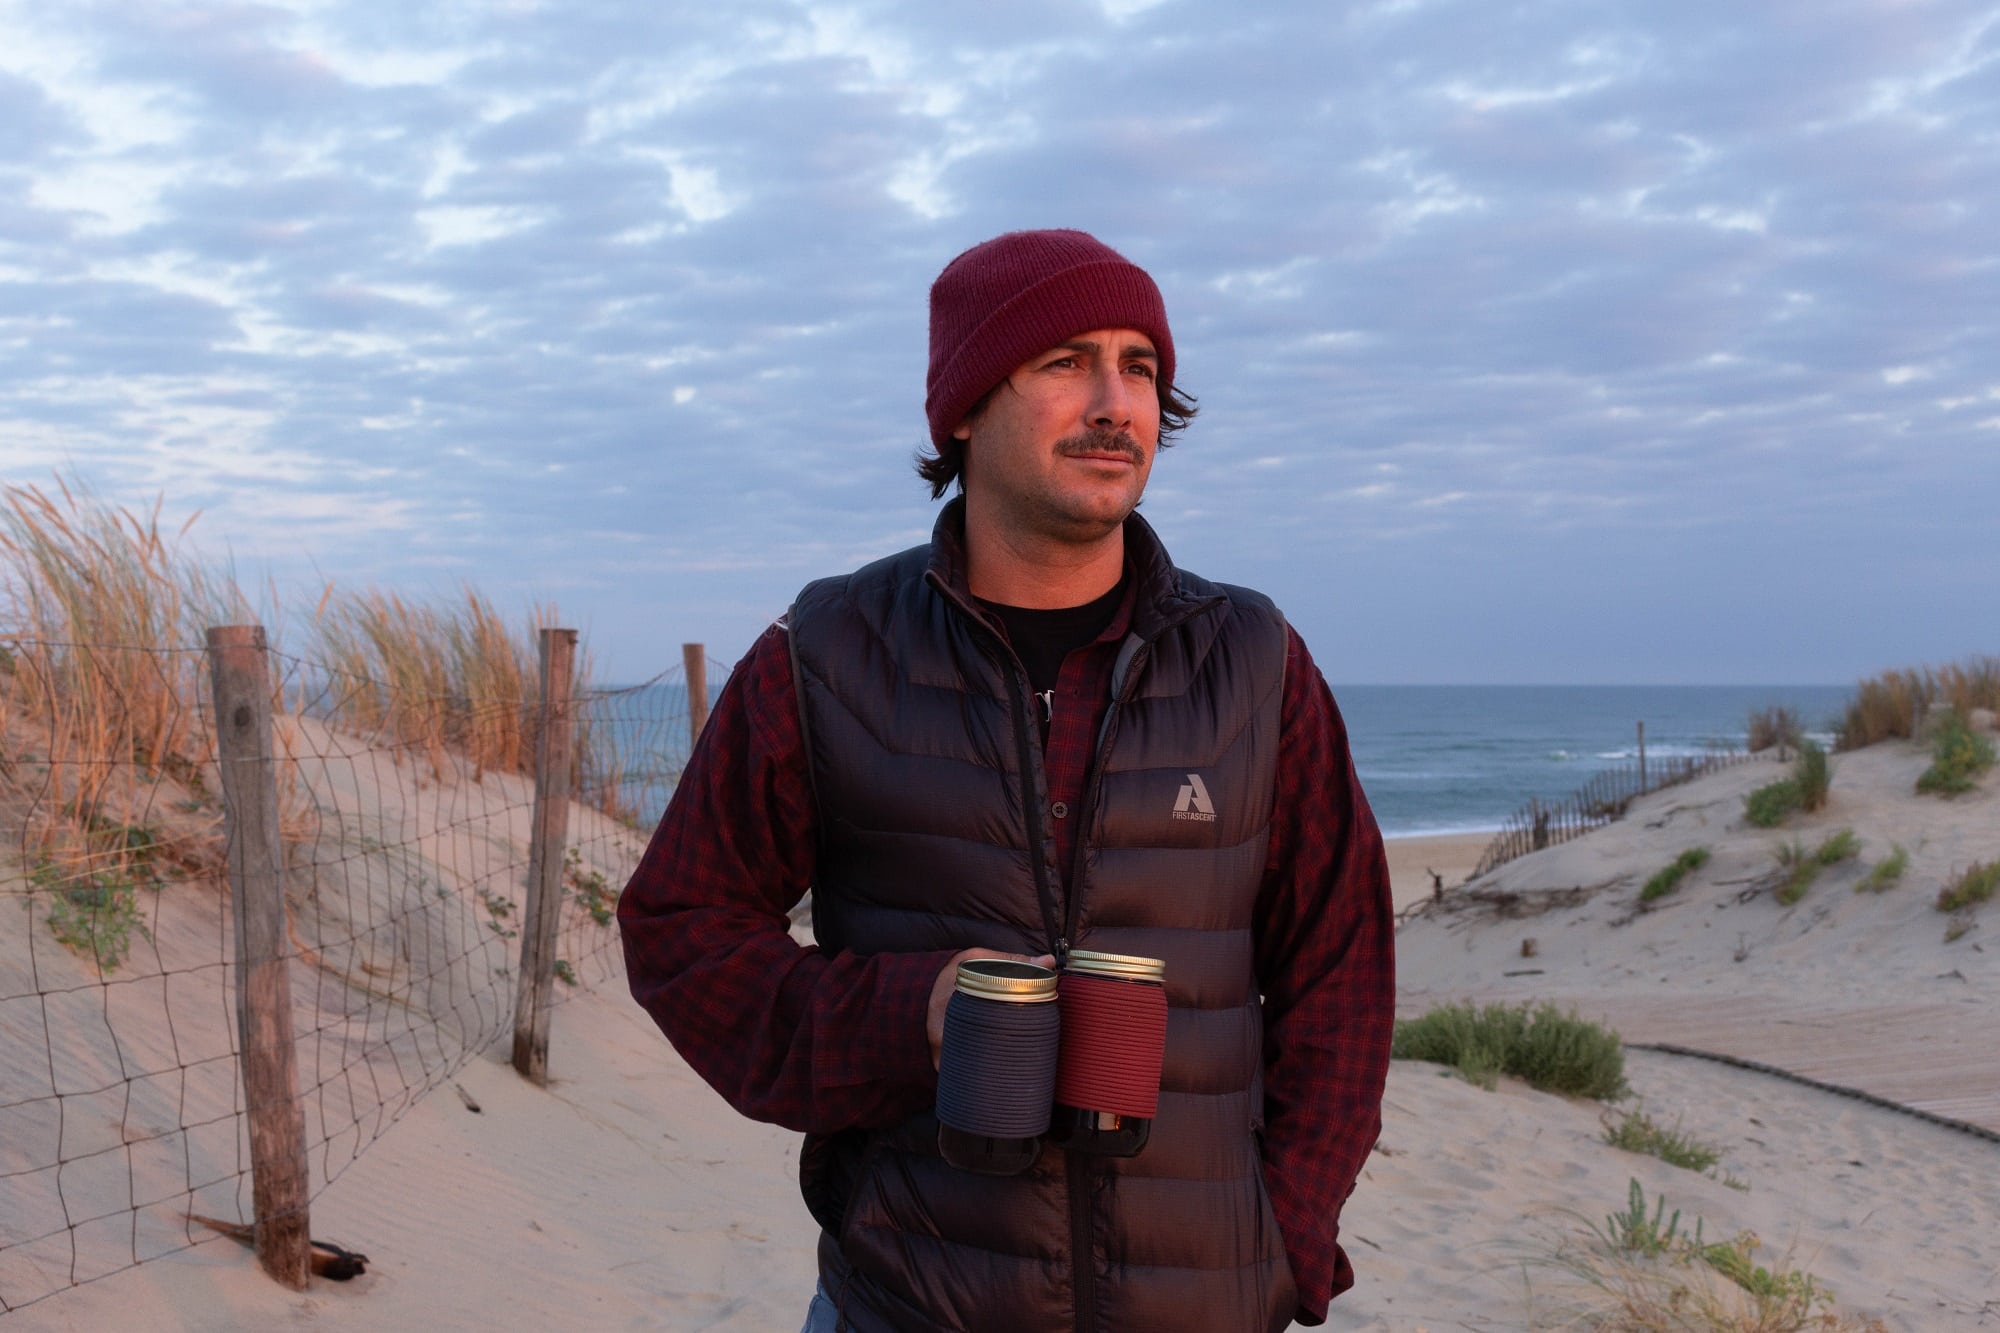 Man carrying two insulated mugs on beach at sunset wearing warm layers